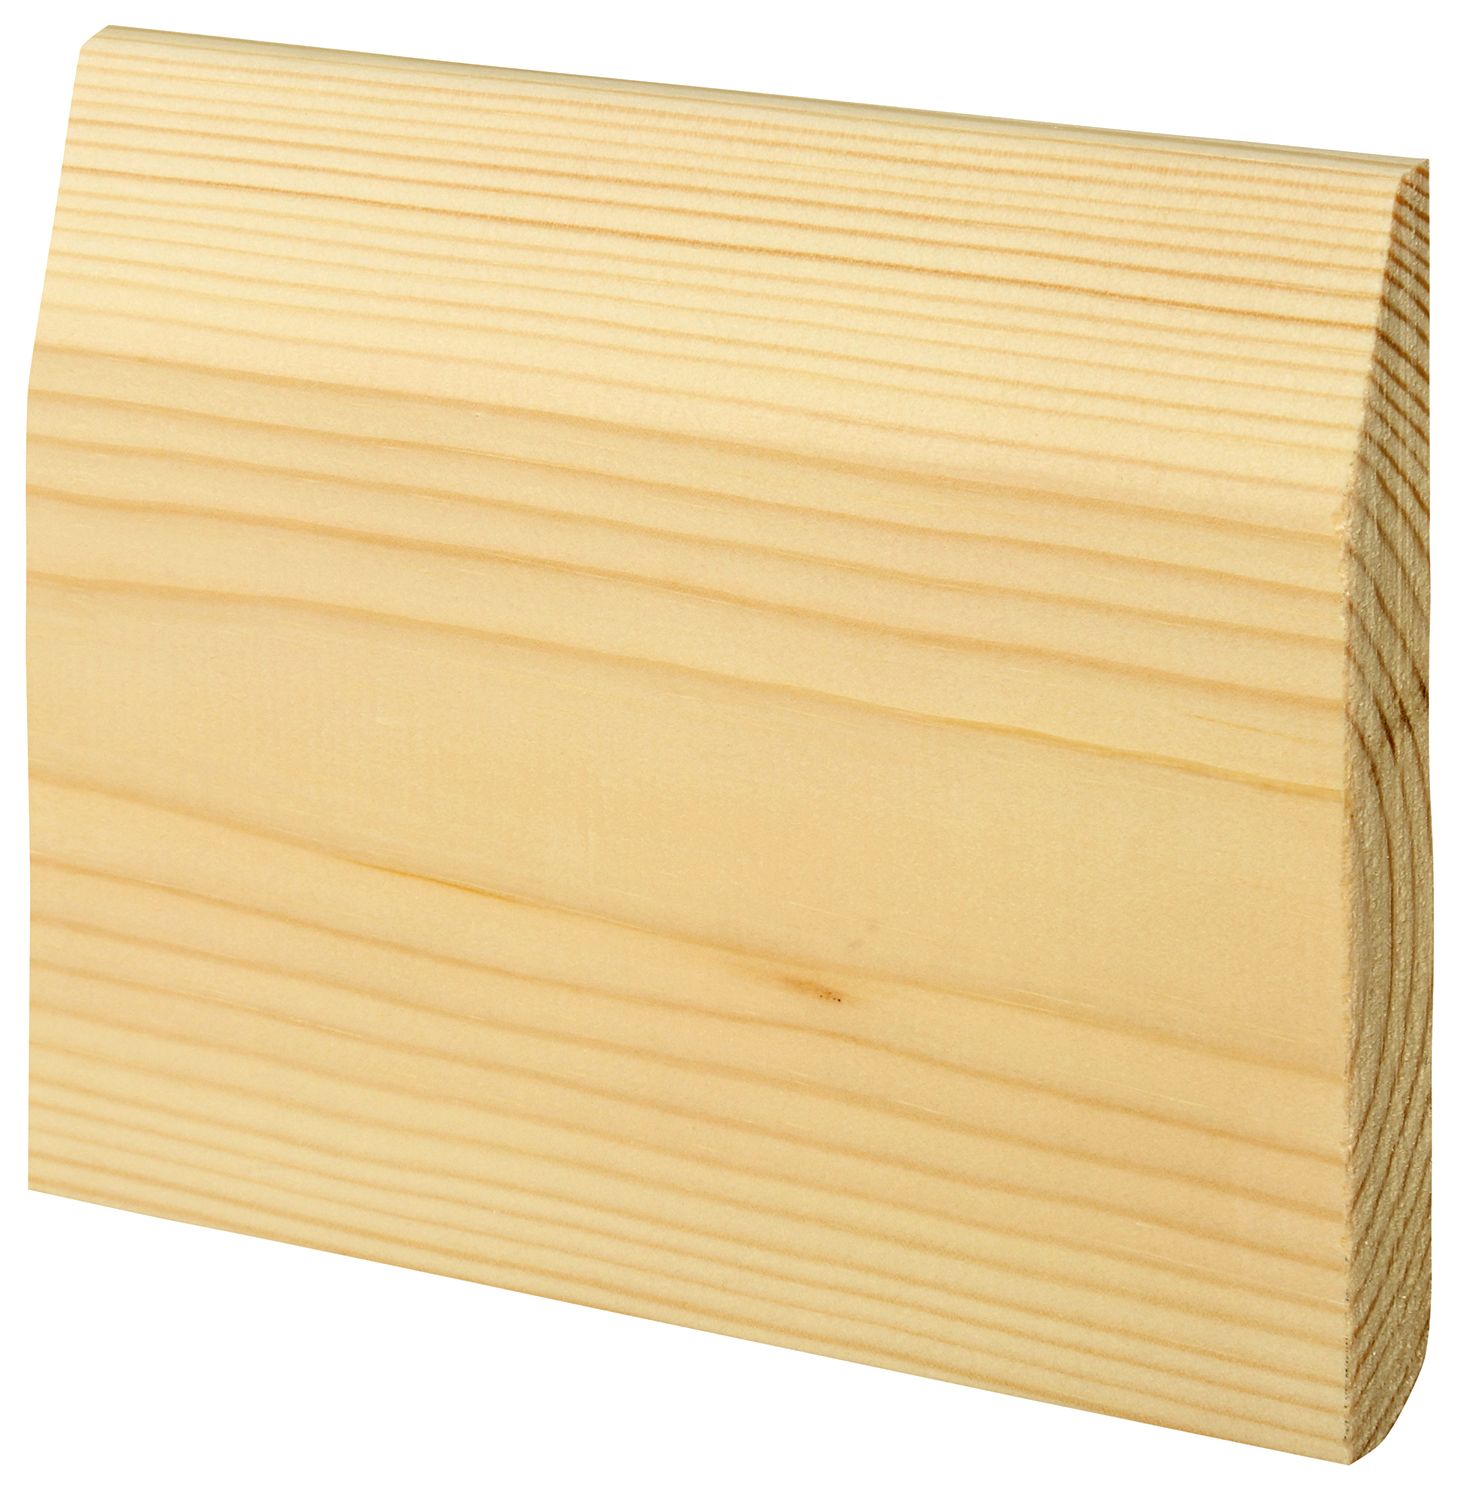 Image of Wickes Dual Purpose Chamfered/Bullnose Pine Skirting - 19 x 119 x 3600mm - Pack of 2